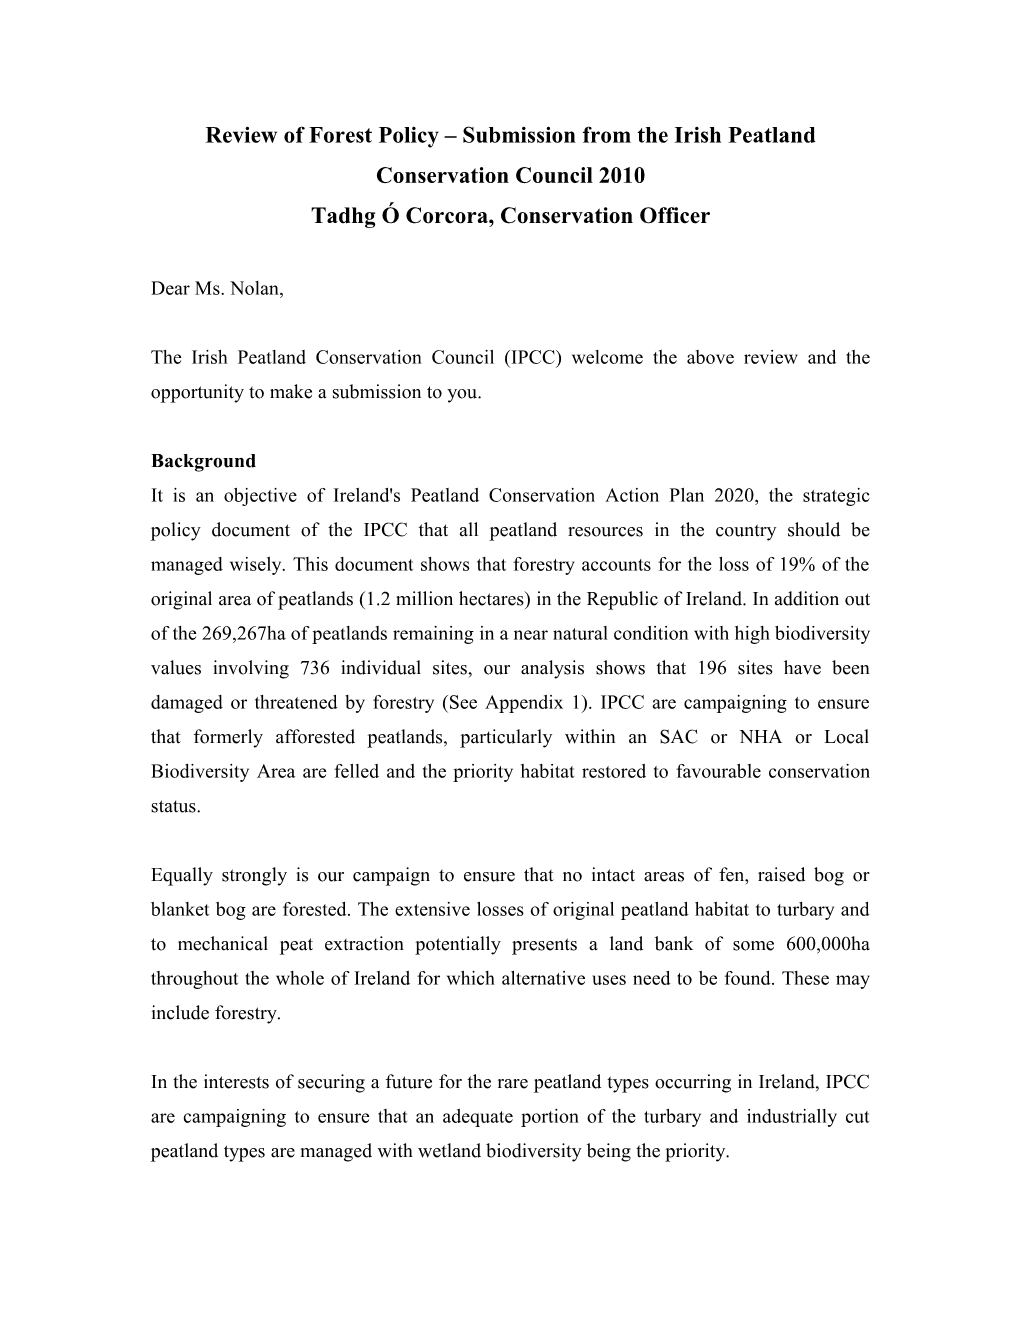 Review of Forest Policy Submission from the Irish Peatland Conservation Council 2010